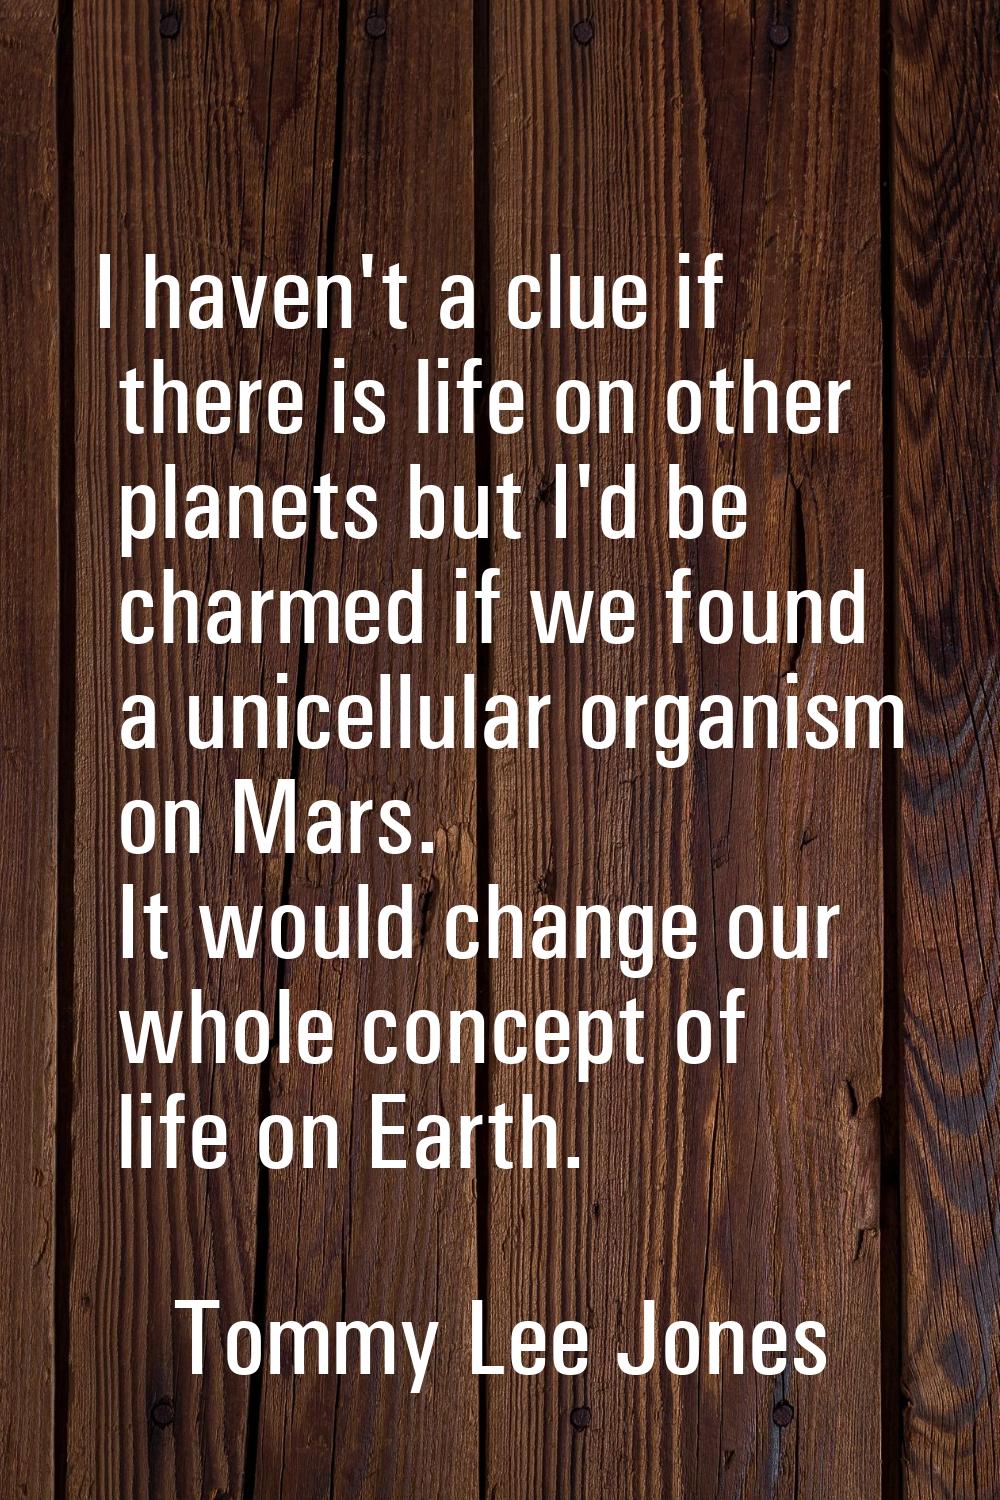 I haven't a clue if there is life on other planets but I'd be charmed if we found a unicellular org